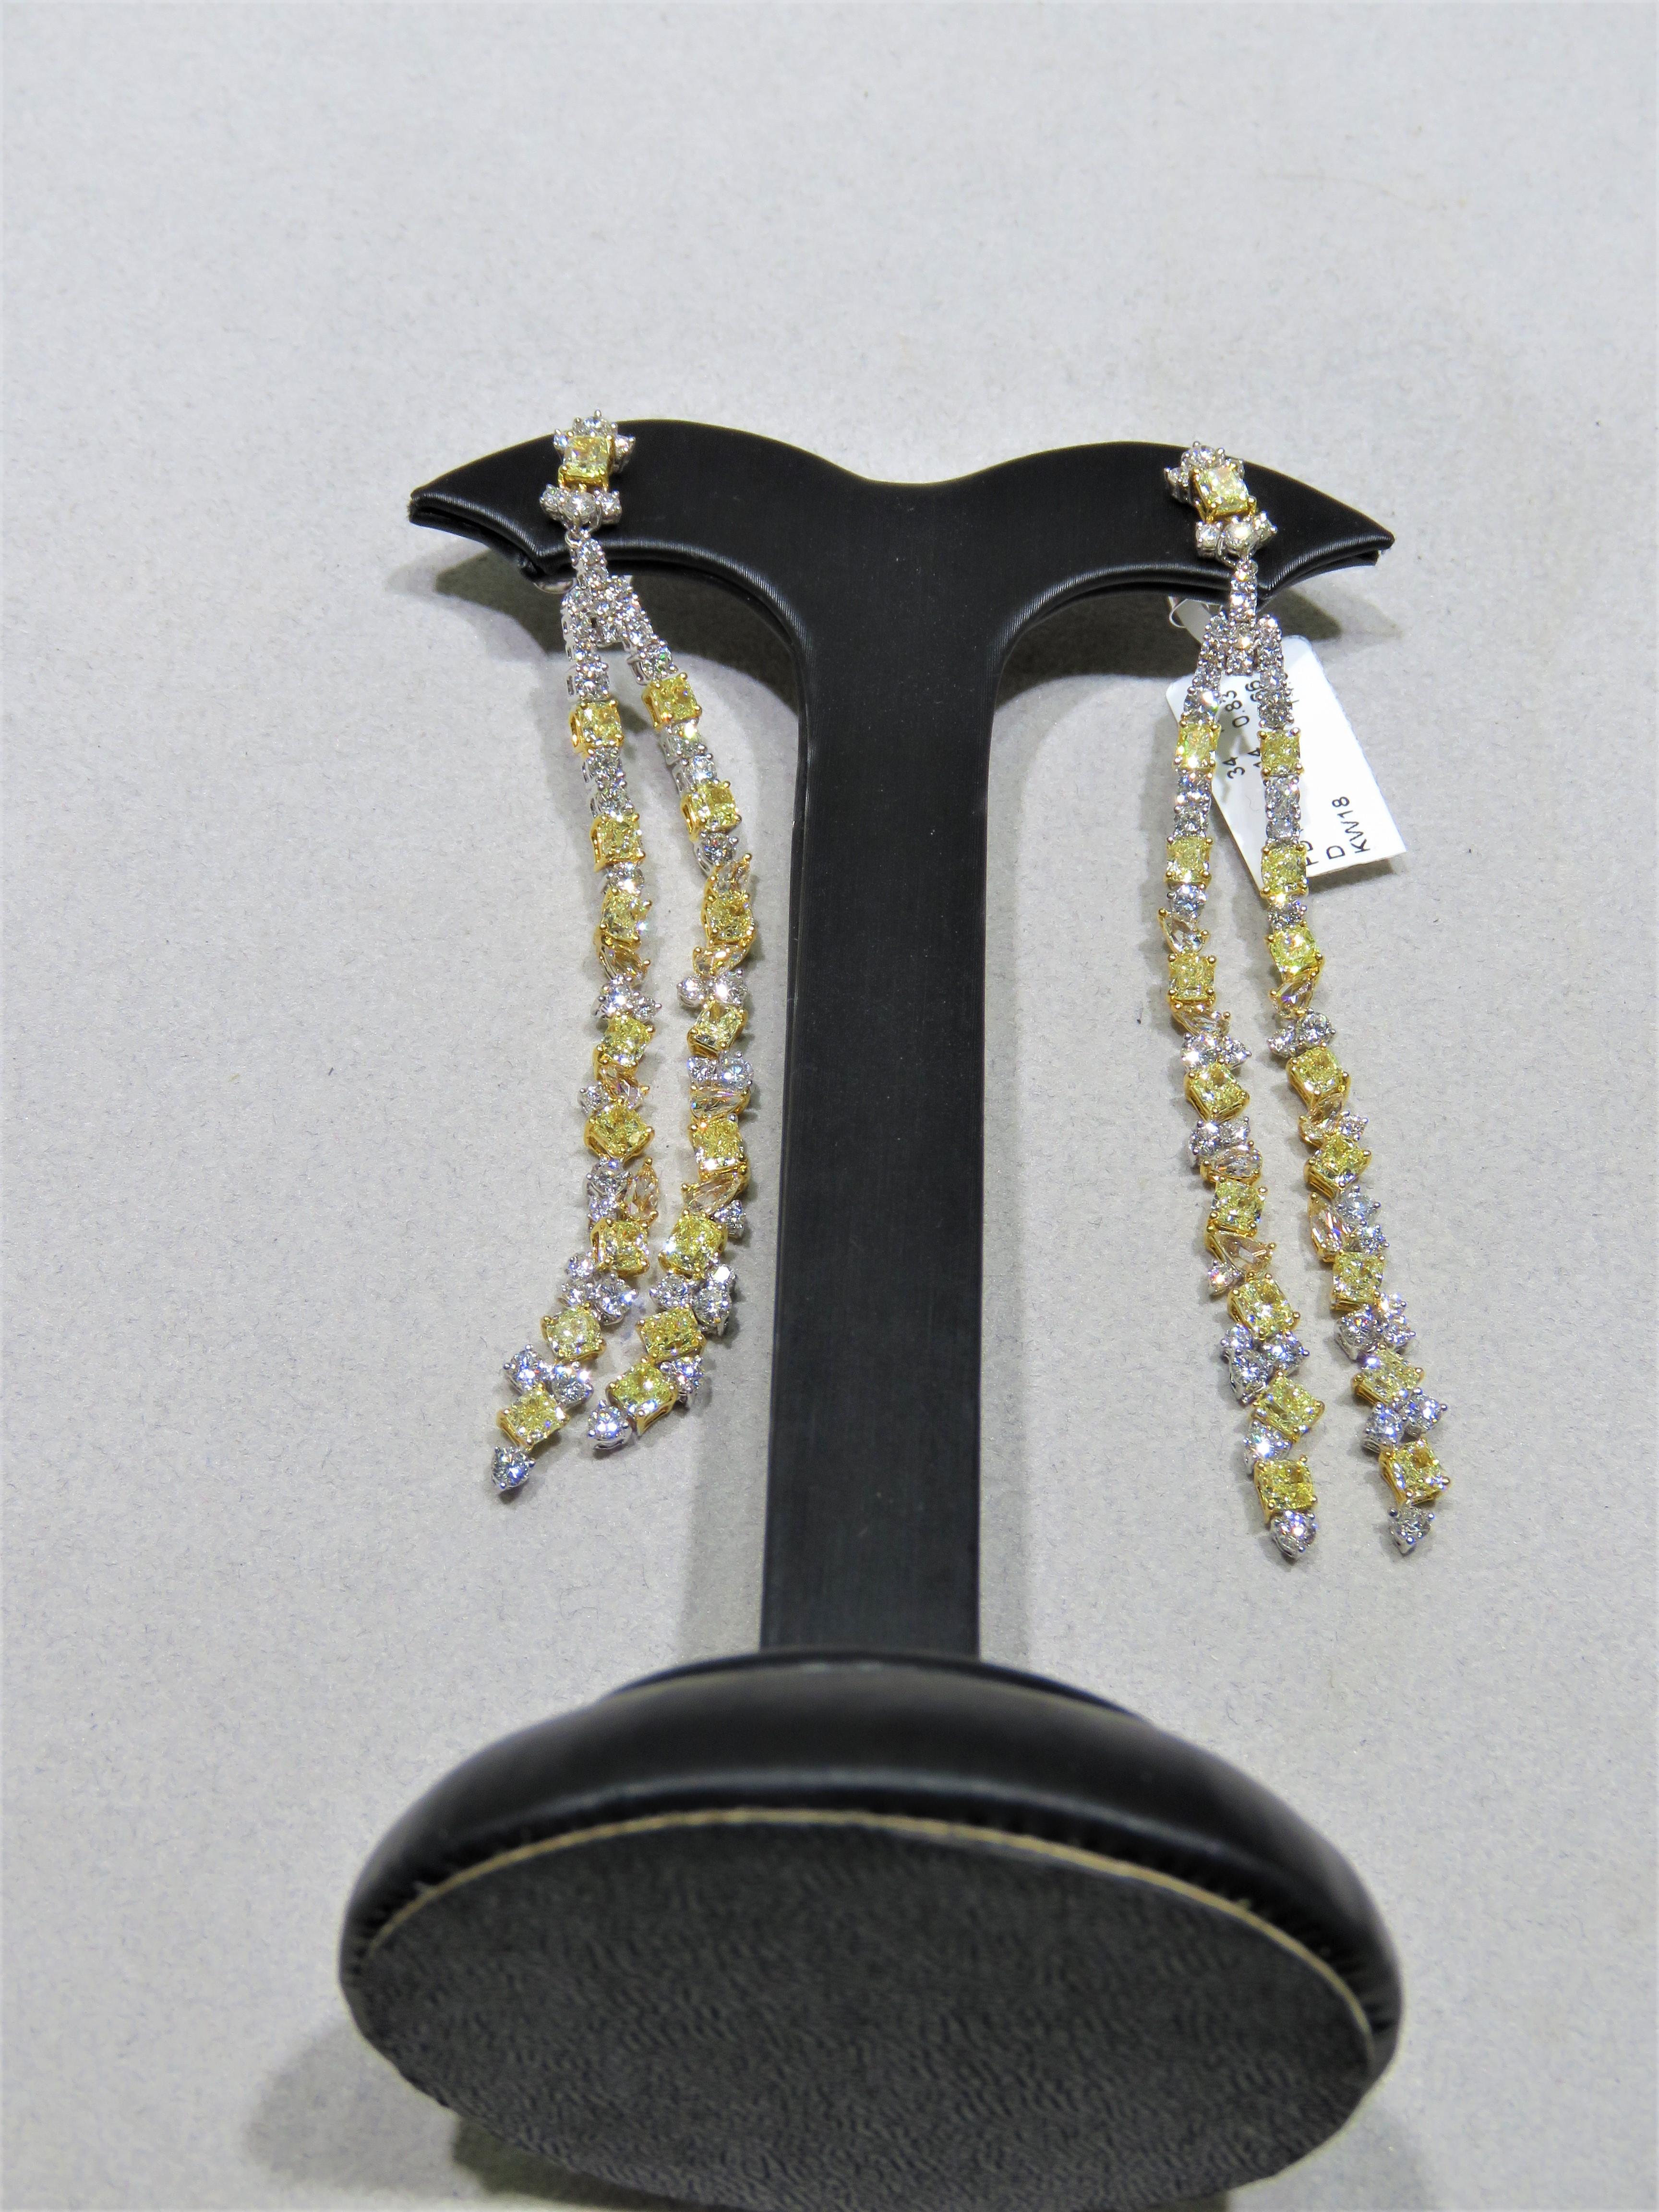 The Following Item we are offering are these Extremely Rare Beautiful 18KT Gold Fine Large Fancy Yellow and White Diamond Dangle Earrings. Each Earring features Rare Gorgeous Glittering Fancy Large Yellow Diamonds adorned with Sparkling Mixed White